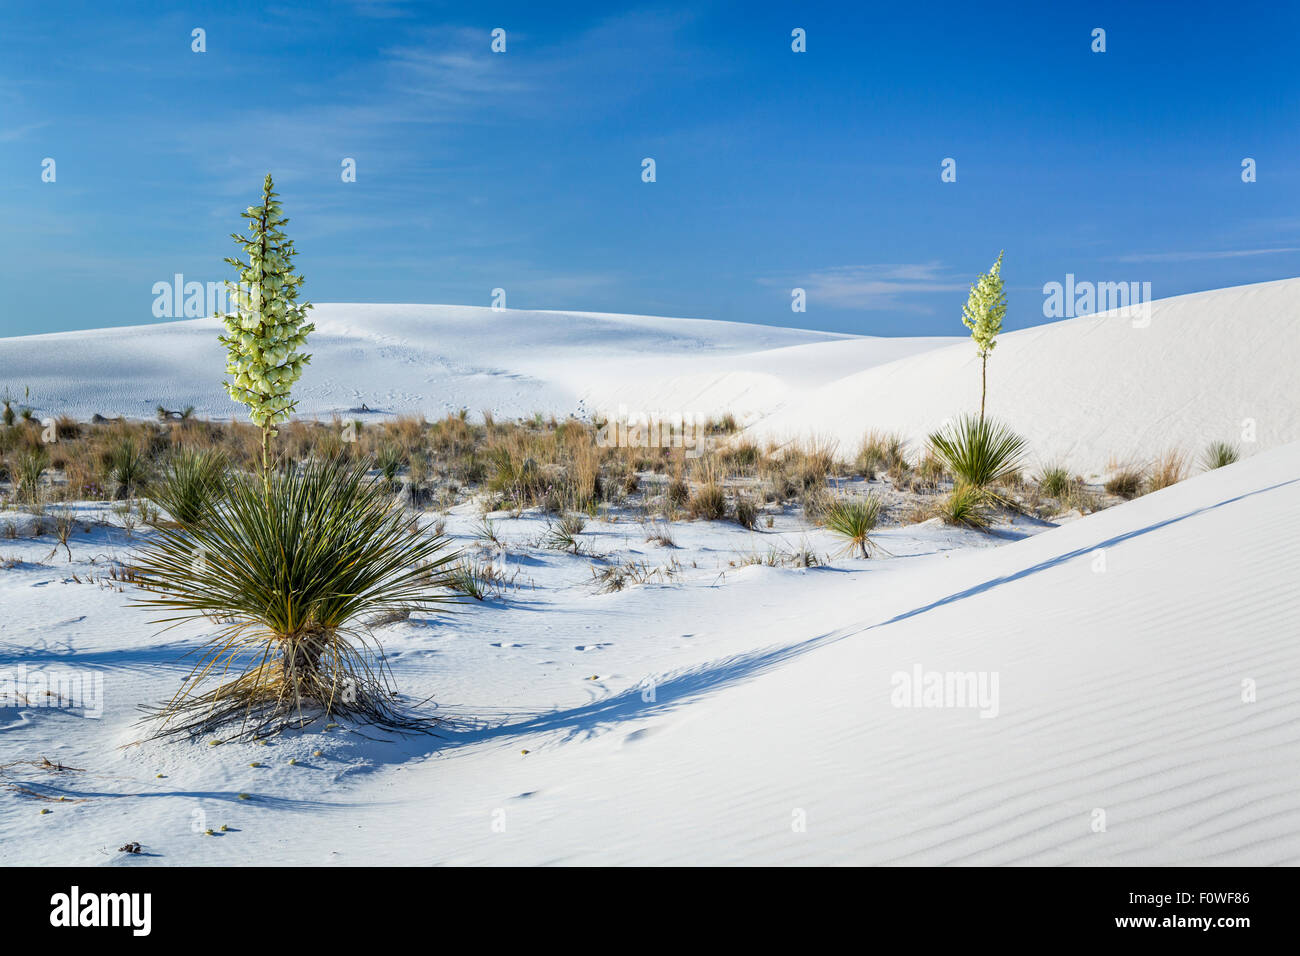 A blooming yucca plant in the white gypsum sand dunes of the White Sands National Monument near Alamogordo, New Mexico, USA. Stock Photo